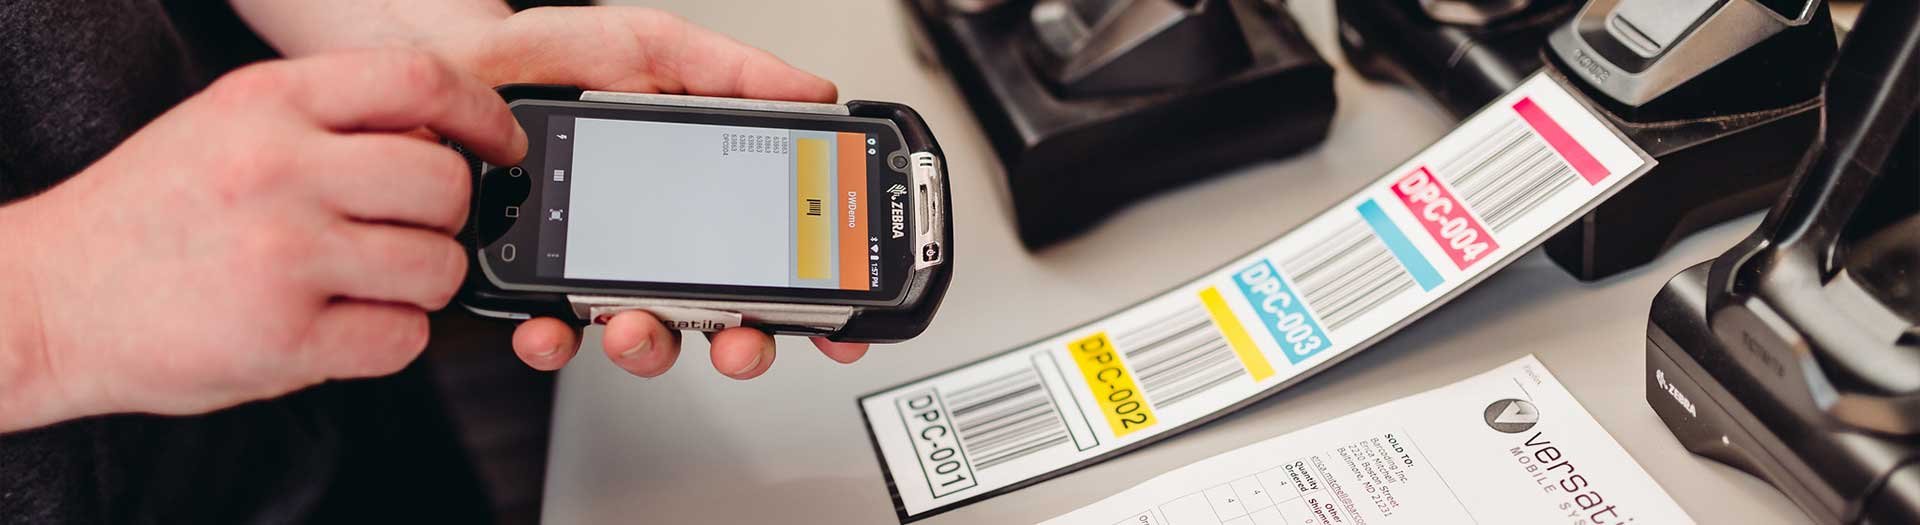 using-android-phone-to-scan-labels